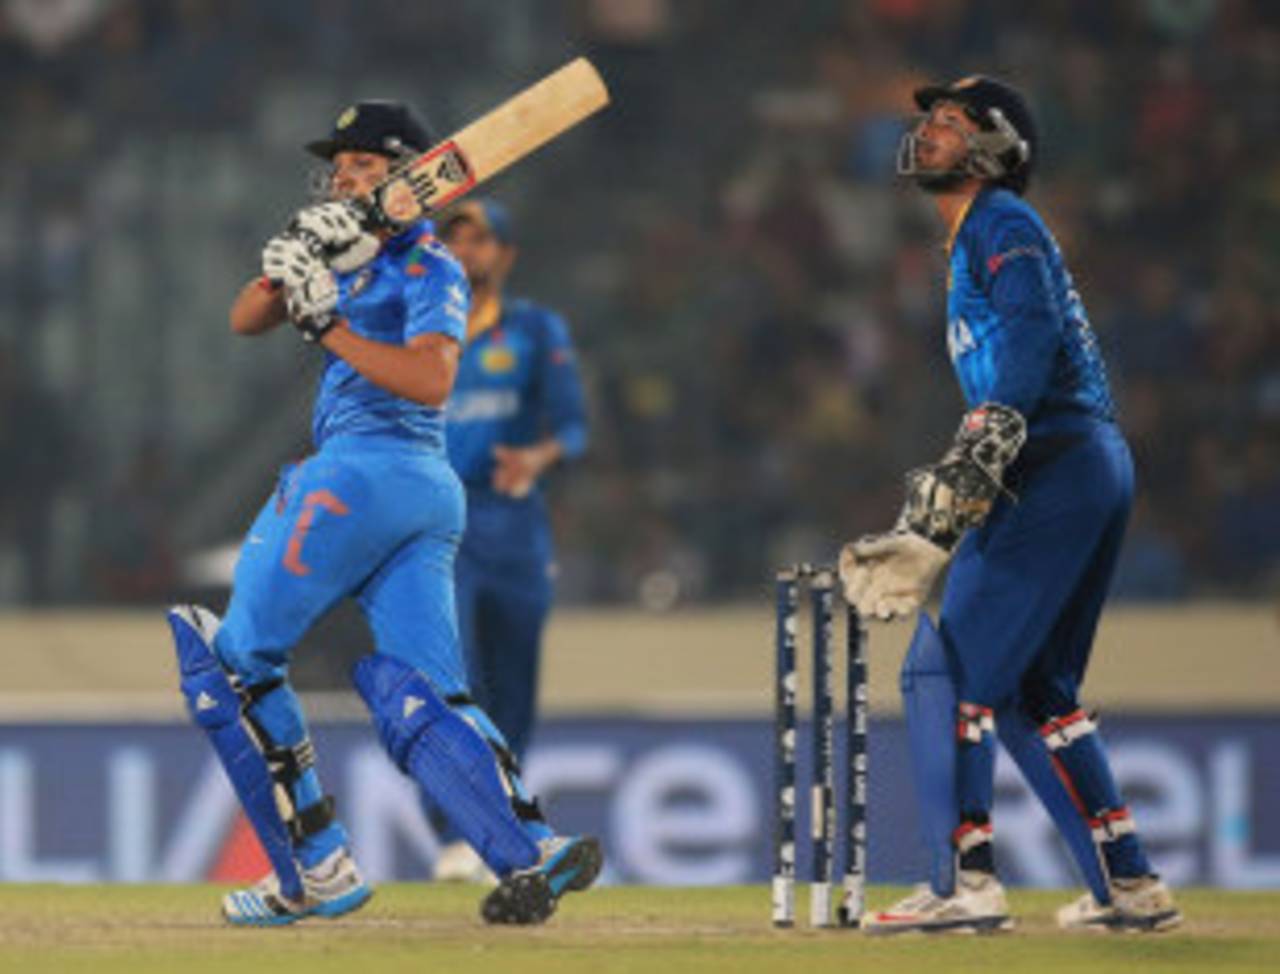 Rohit Sharma: "While opening, you have to be extra focused. Being cautious has helped my batting."&nbsp;&nbsp;&bull;&nbsp;&nbsp;ICC